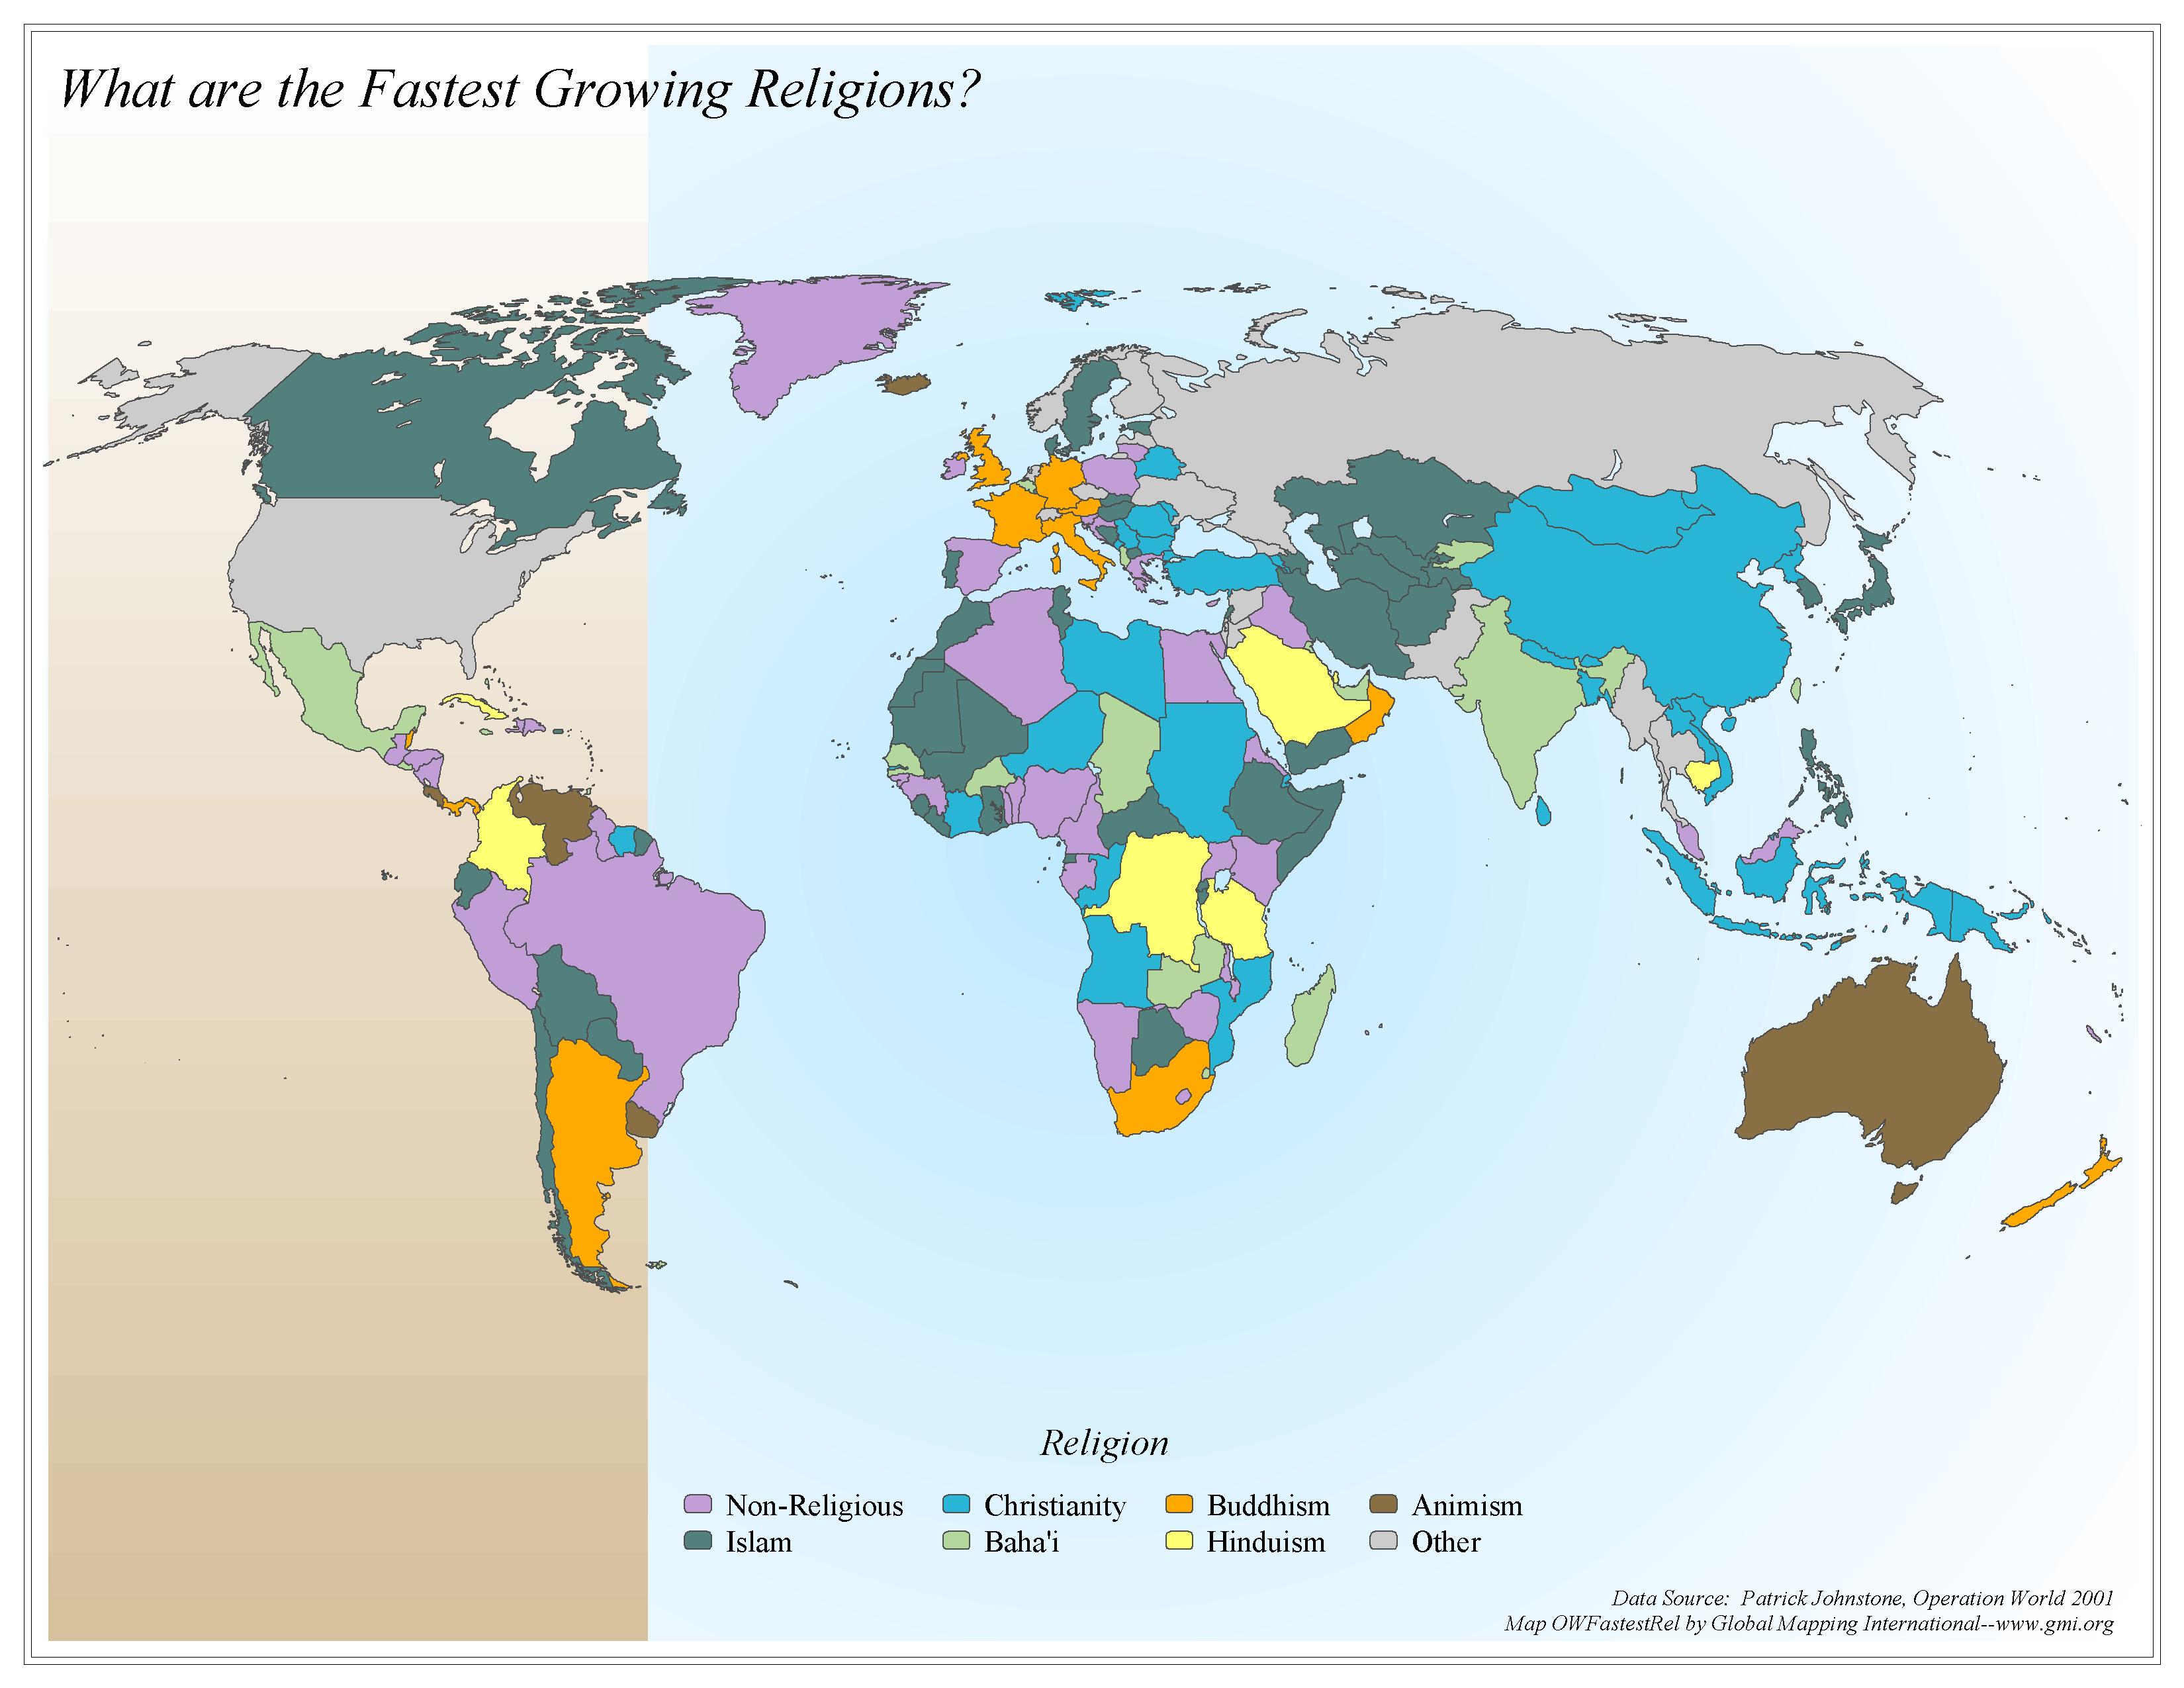 What are the Fastest Growing Religions?